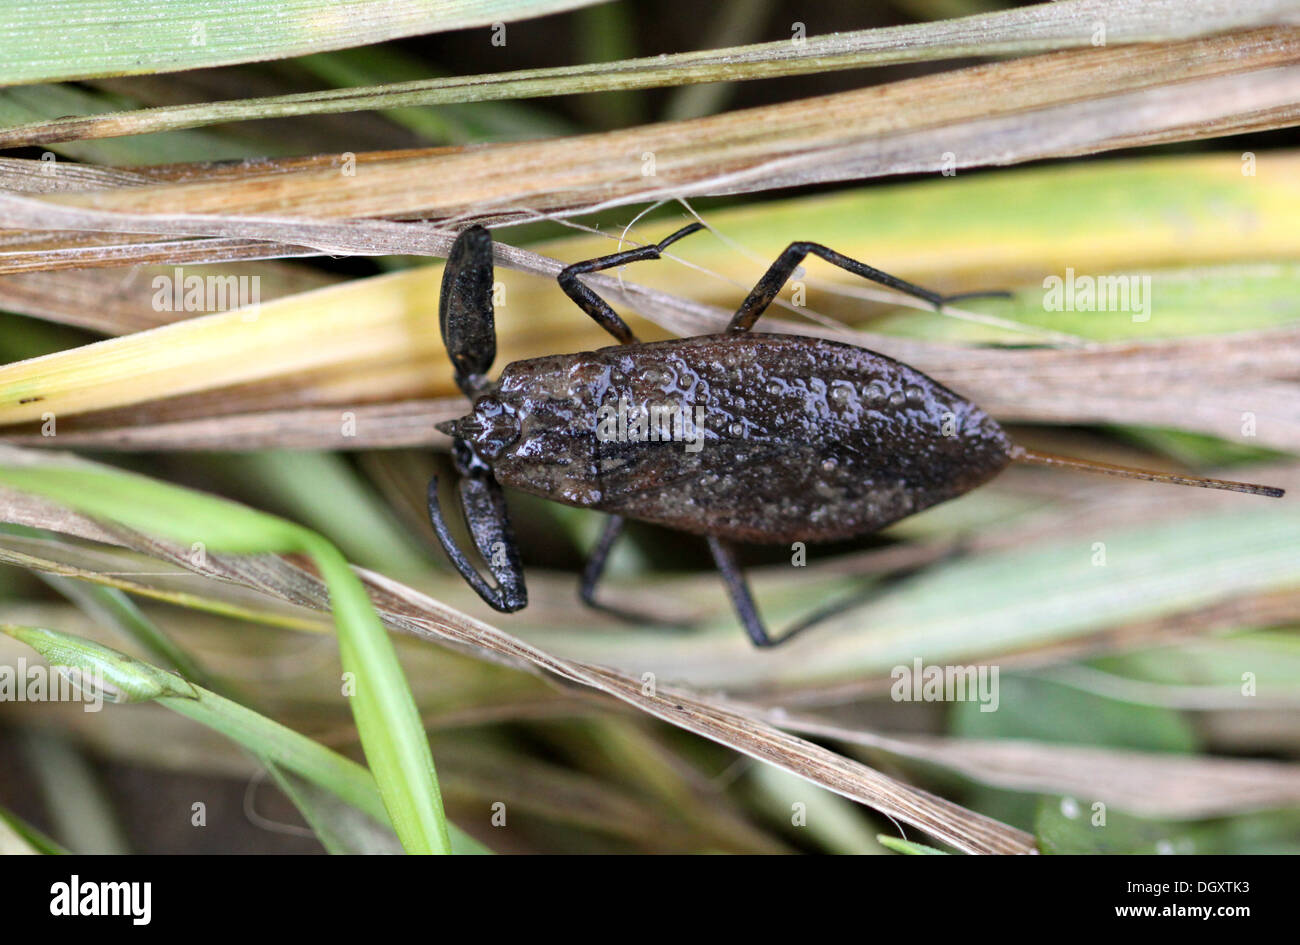 River scorpion sitting on the green grass Stock Photo